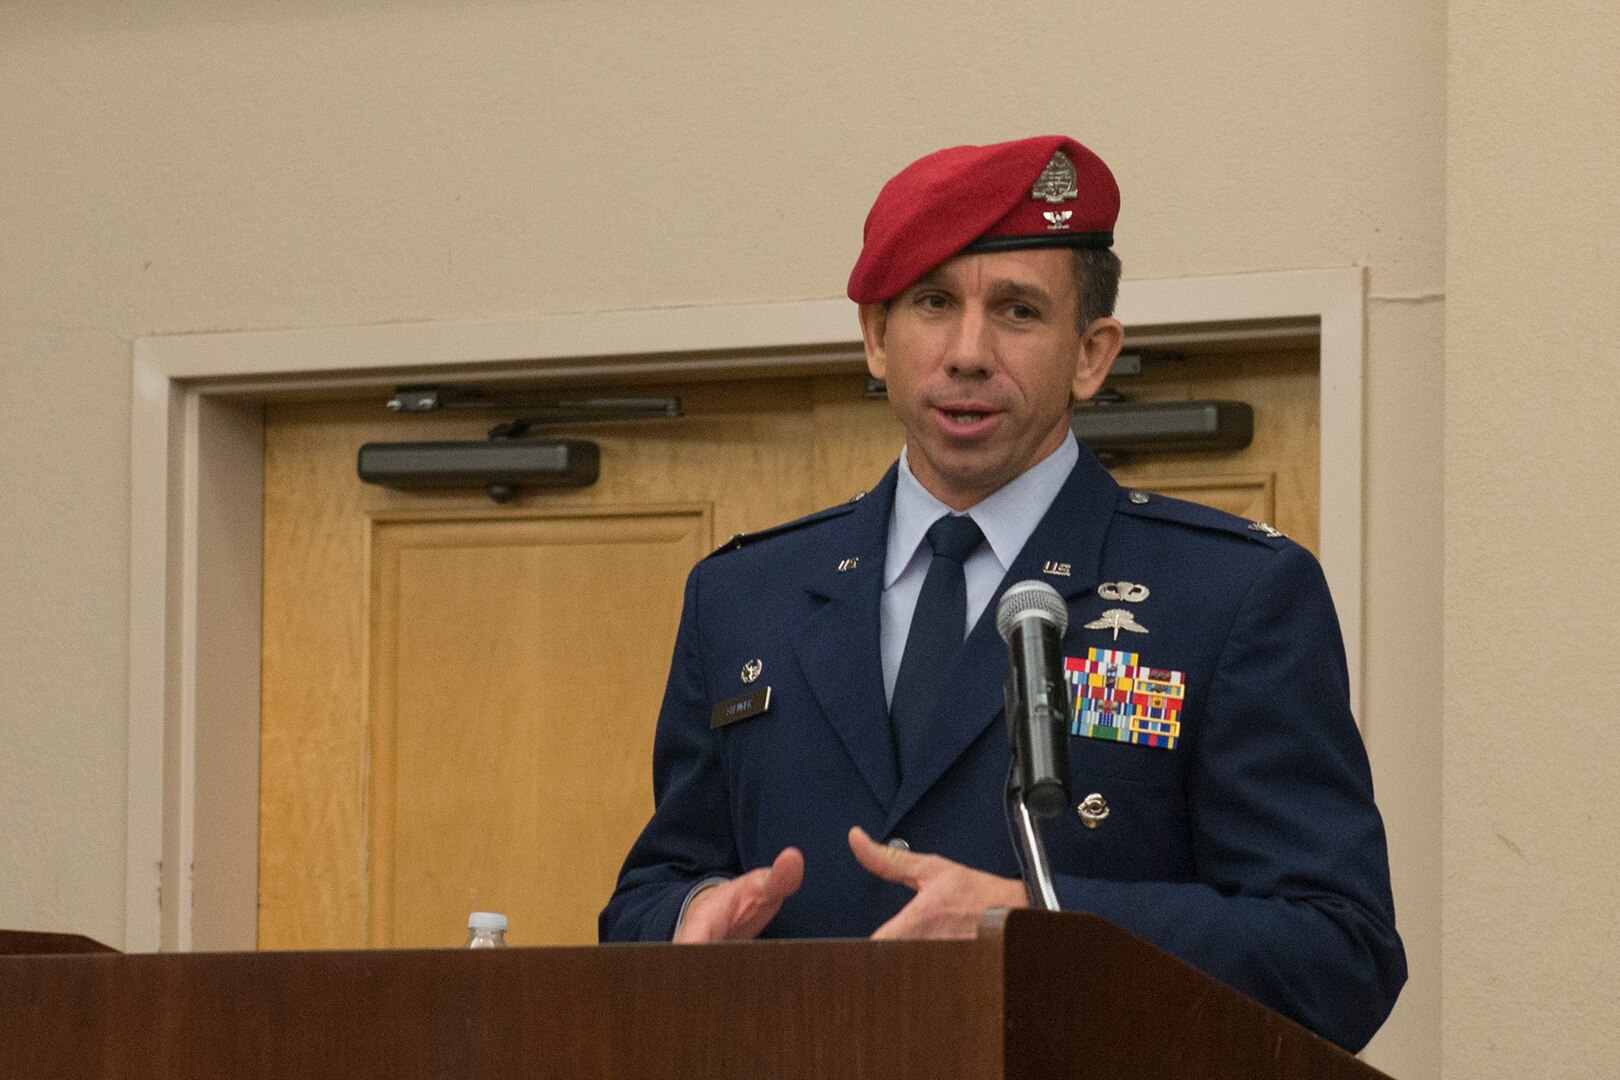 Col. Ronald Stenger, the inaugural commander for the Battlefield Airman Training Group, addresses the audience during the BA TG activation ceremony June 2, 2016, at Joint Base San Antonio-Lackland, Texas. The BA TG encompasses five subordinate squadrons, whose members will train the Air Force's conventional and special operations ground forces, including combat controllers, pararescuemen, special operations weathermen and tactical air control party Airmen. (U.S. Air Force photo by Senior Airman Krystal Wright)